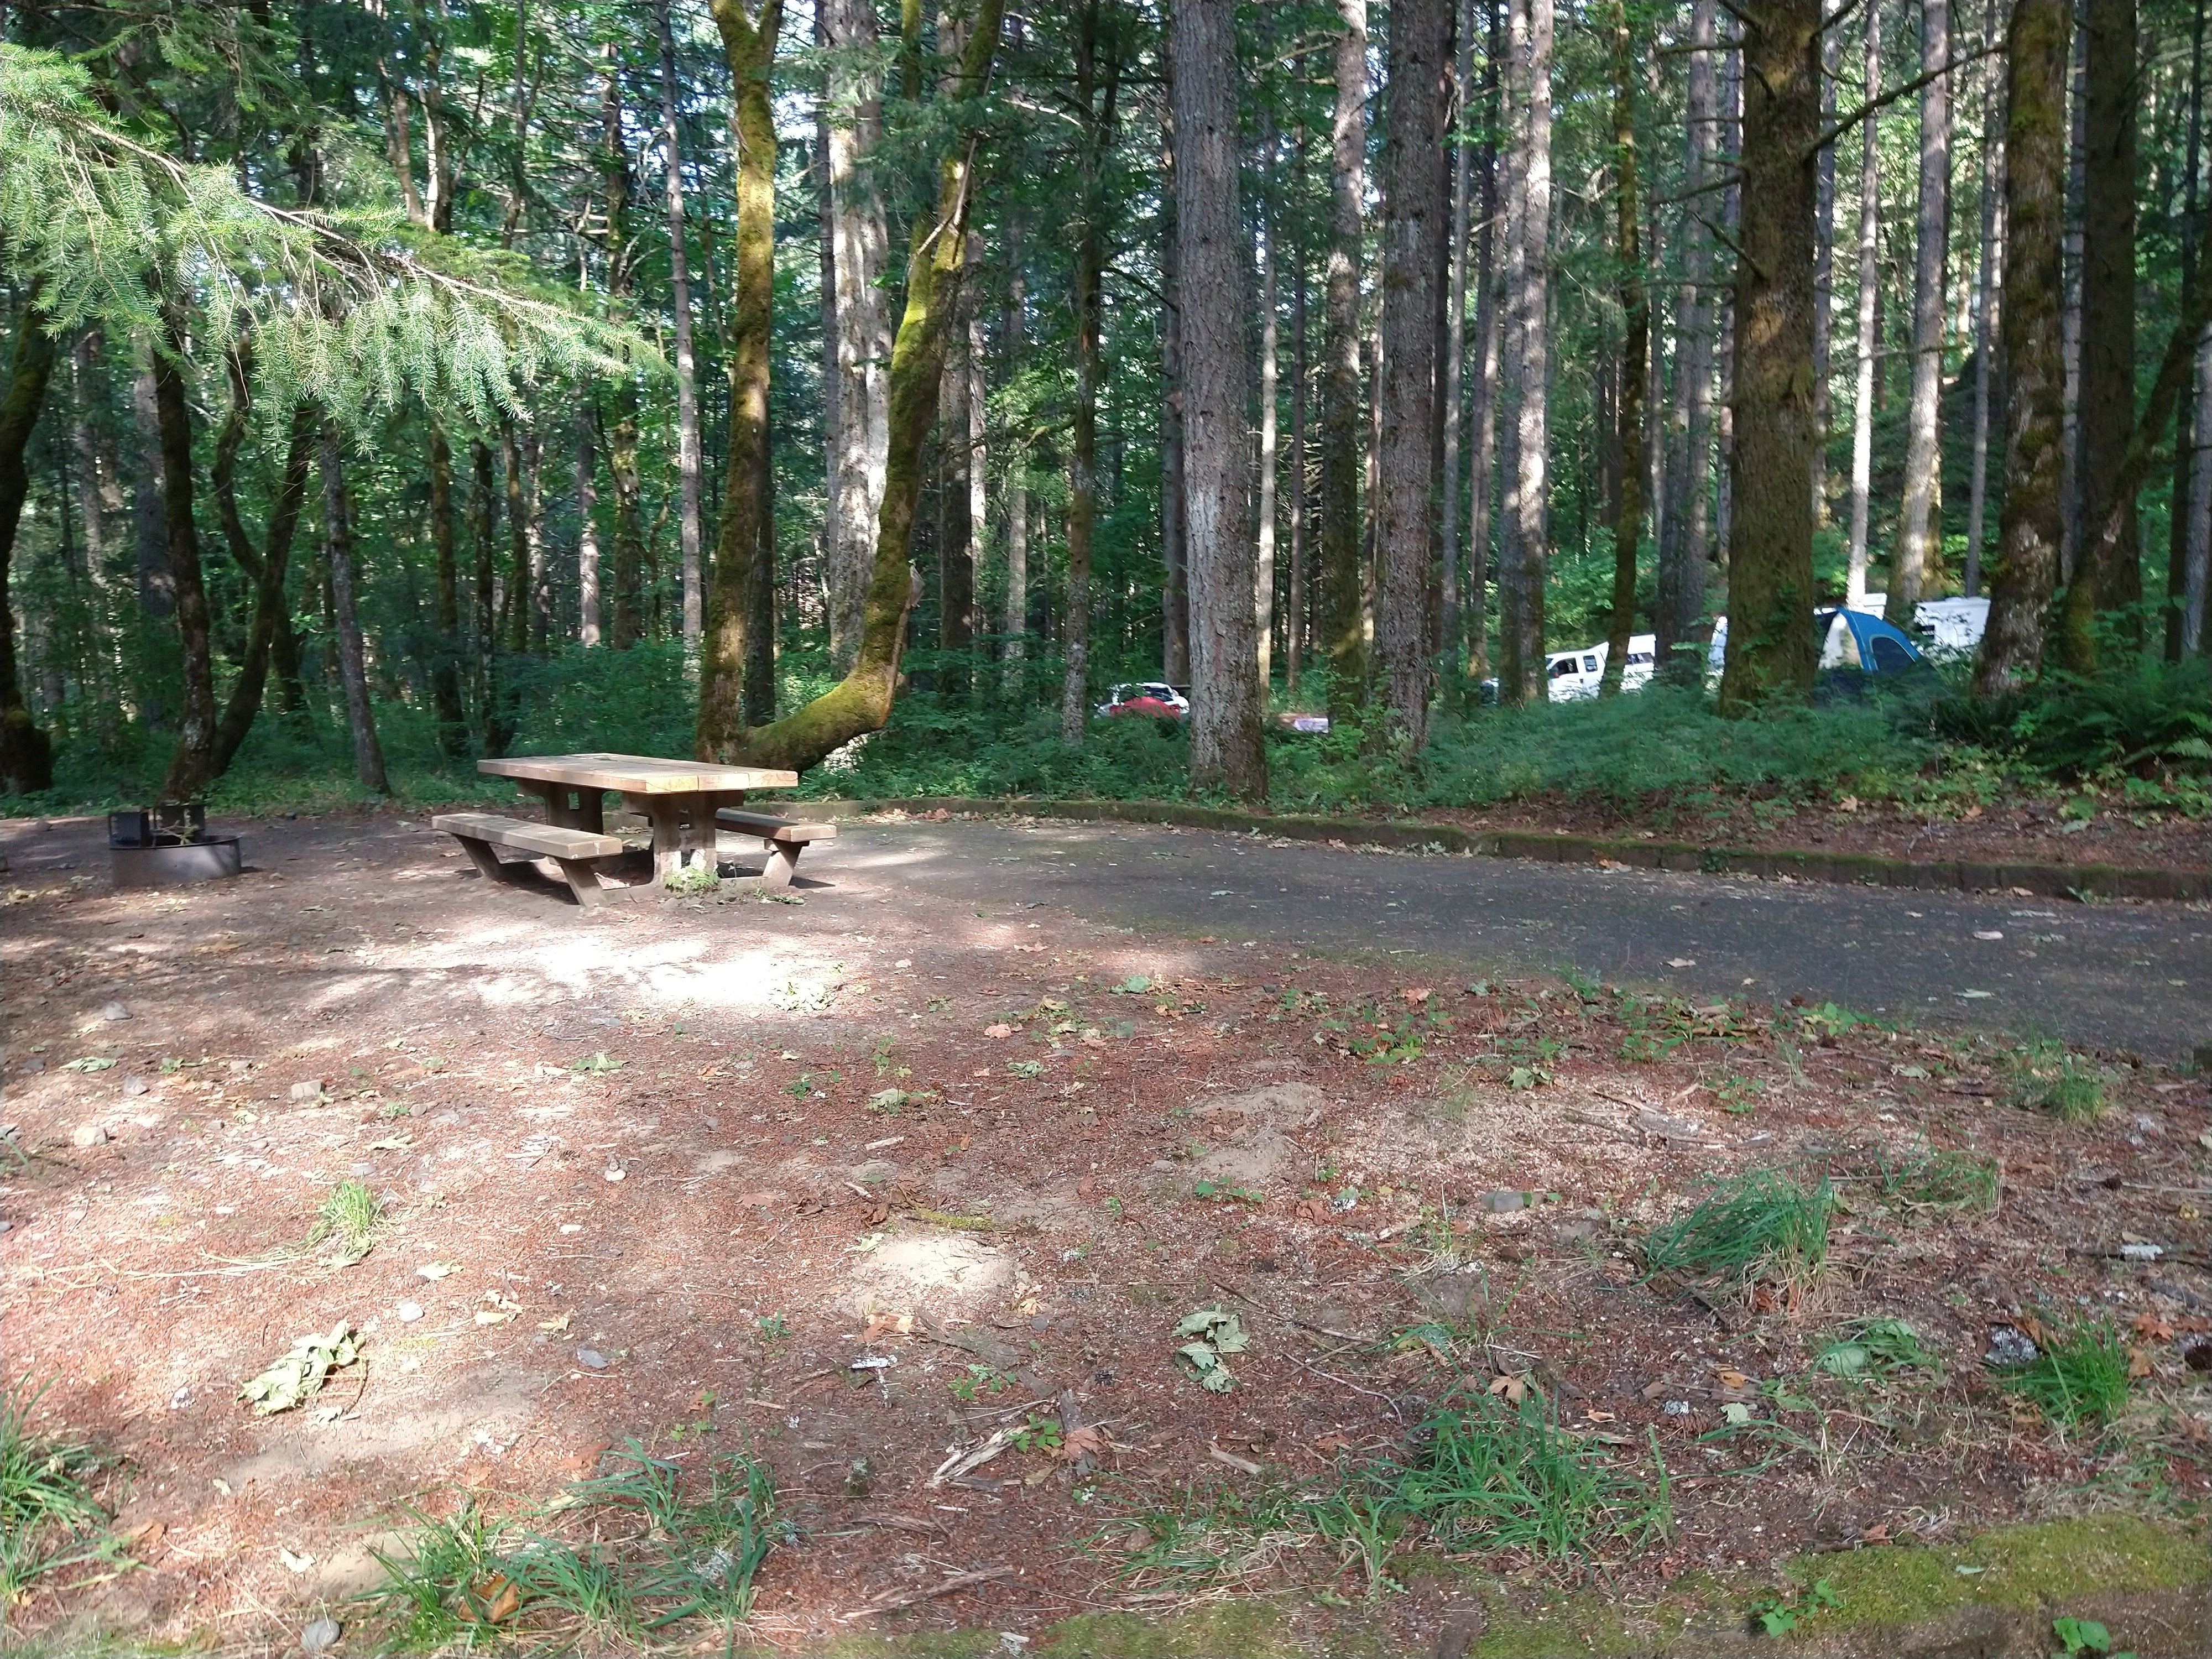 Camper submitted image from Wyeth Campground at the Gorge - 5